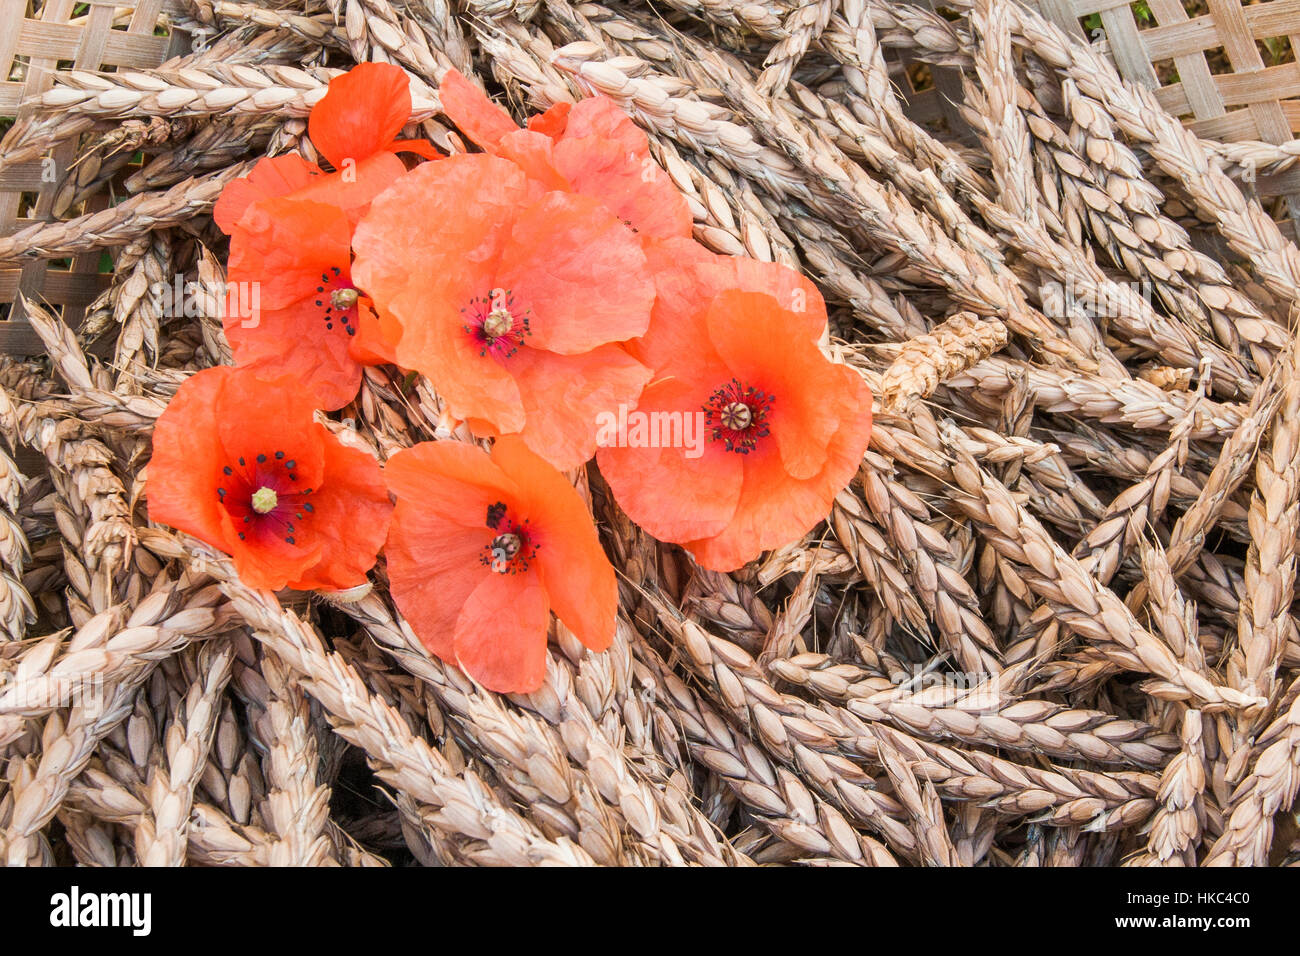 Cob of spelt and red poppies in a basket (France) Stock Photo